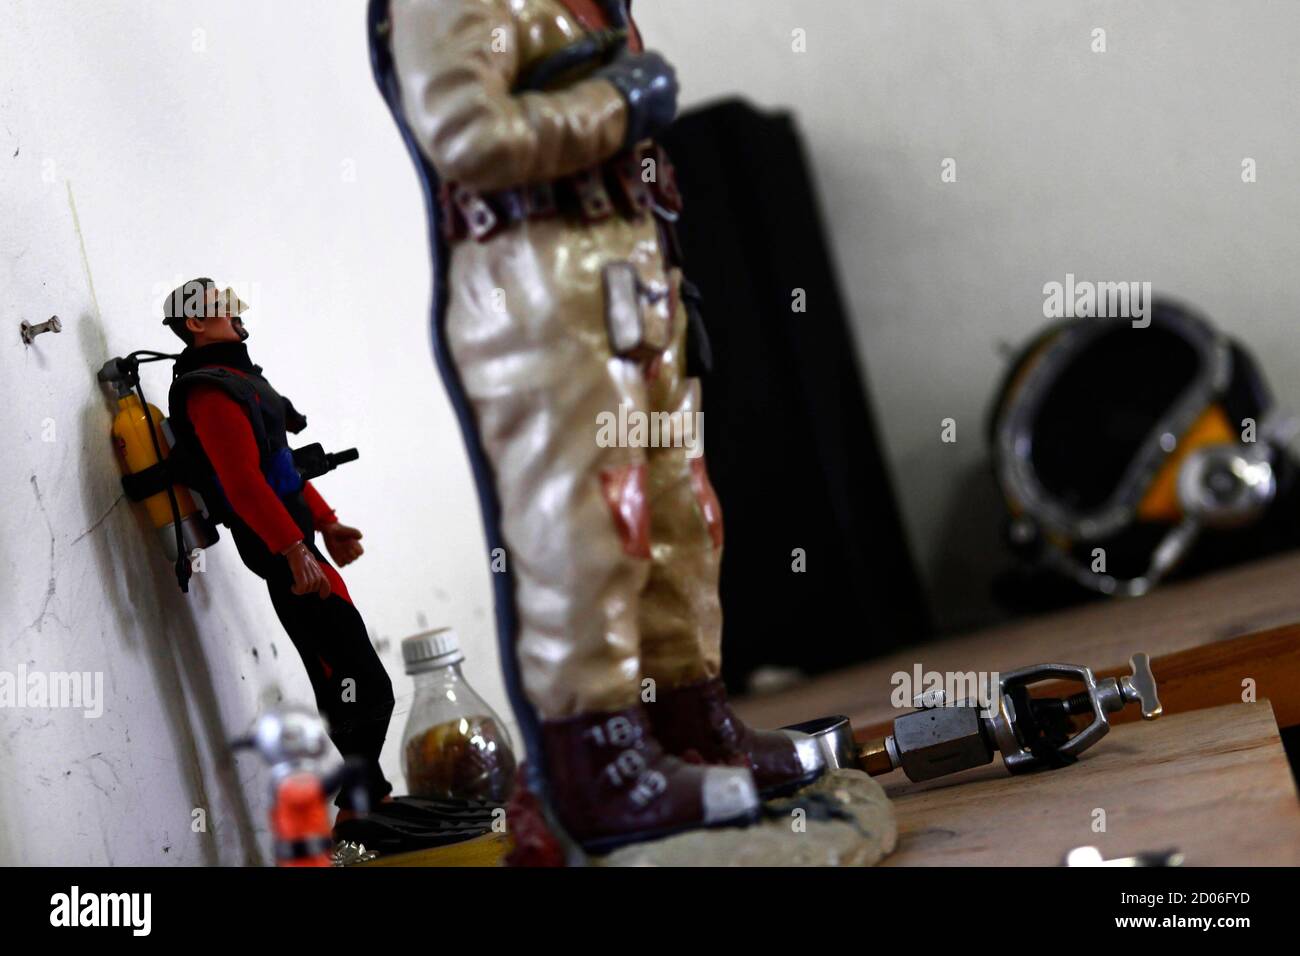 A figurine of a diver is seen inside the office of Mexican sewer diver Julio Cu Camara at the city's drainage system plant in Mexico City March 21, 2013. Cu Camara's job involves diving in the city's sewage system to clear blockages and repair infrastructure, on an average of four times a month, for about 30 minutes to six hours depending on the amount of work needed. Cu Camara, who started working as a sewer diver 30 years ago, uses a diving suit and helmet that weigh more than 40 kg to protect him during his dives. During his working experience, he has found dead humans, horses, weapons and  Stock Photo